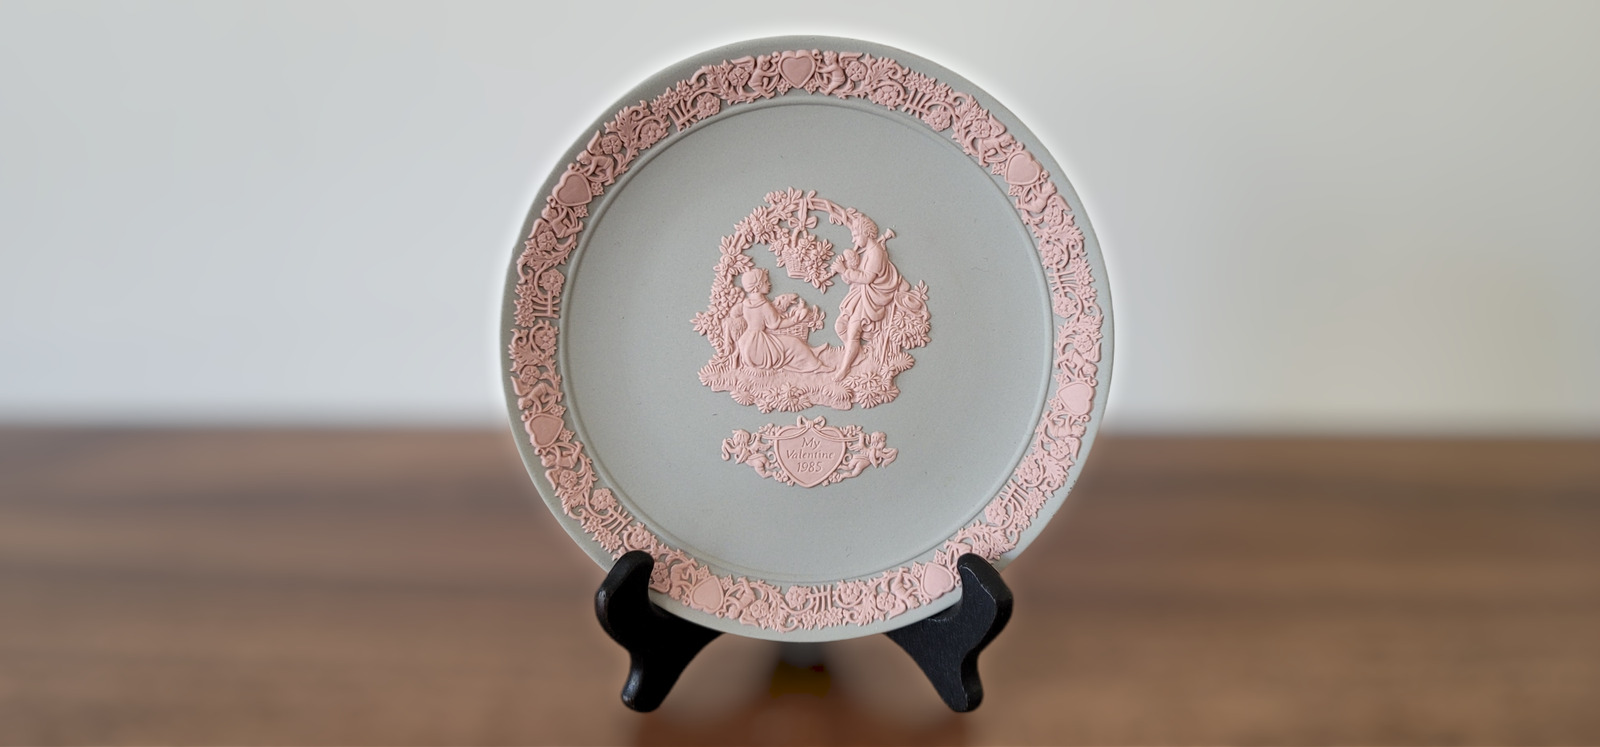 One Plate Valentine's Day 1985 WEDGWOOD MADE IN ENGLAND LIMITED EDITION OF 20K